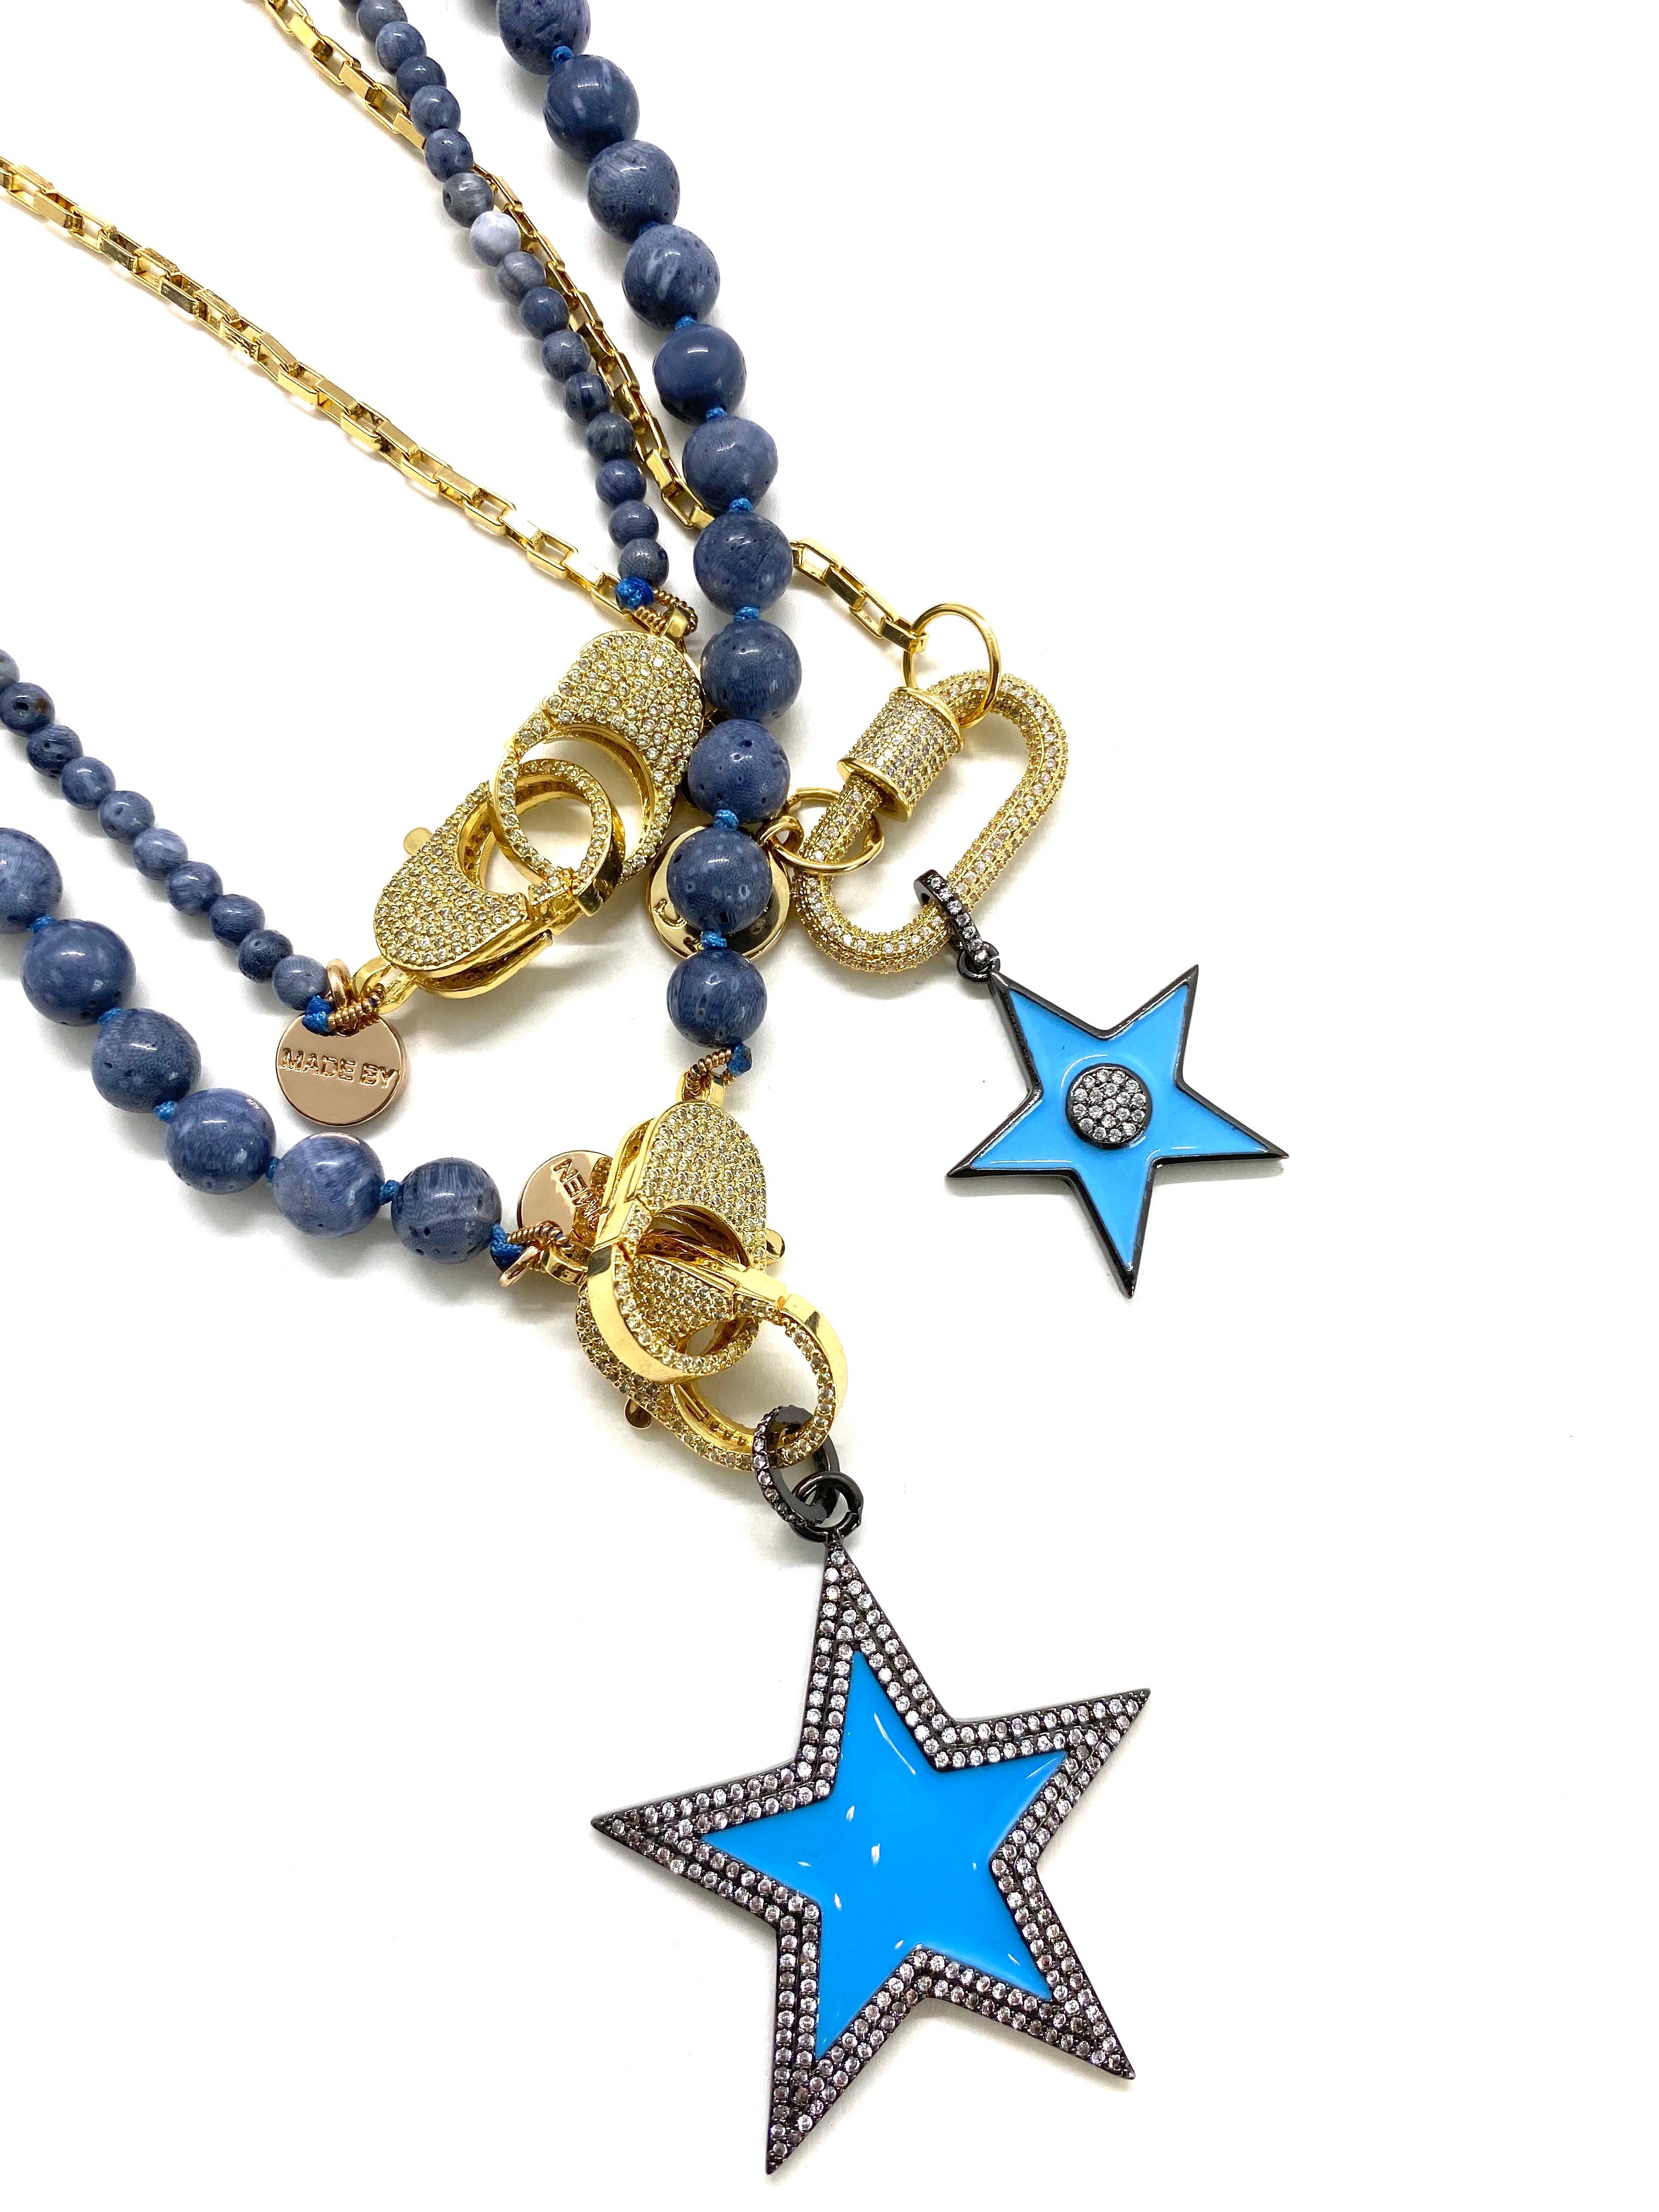 Blue coral Gaia necklace, blue star pendant, gold zirconia clips